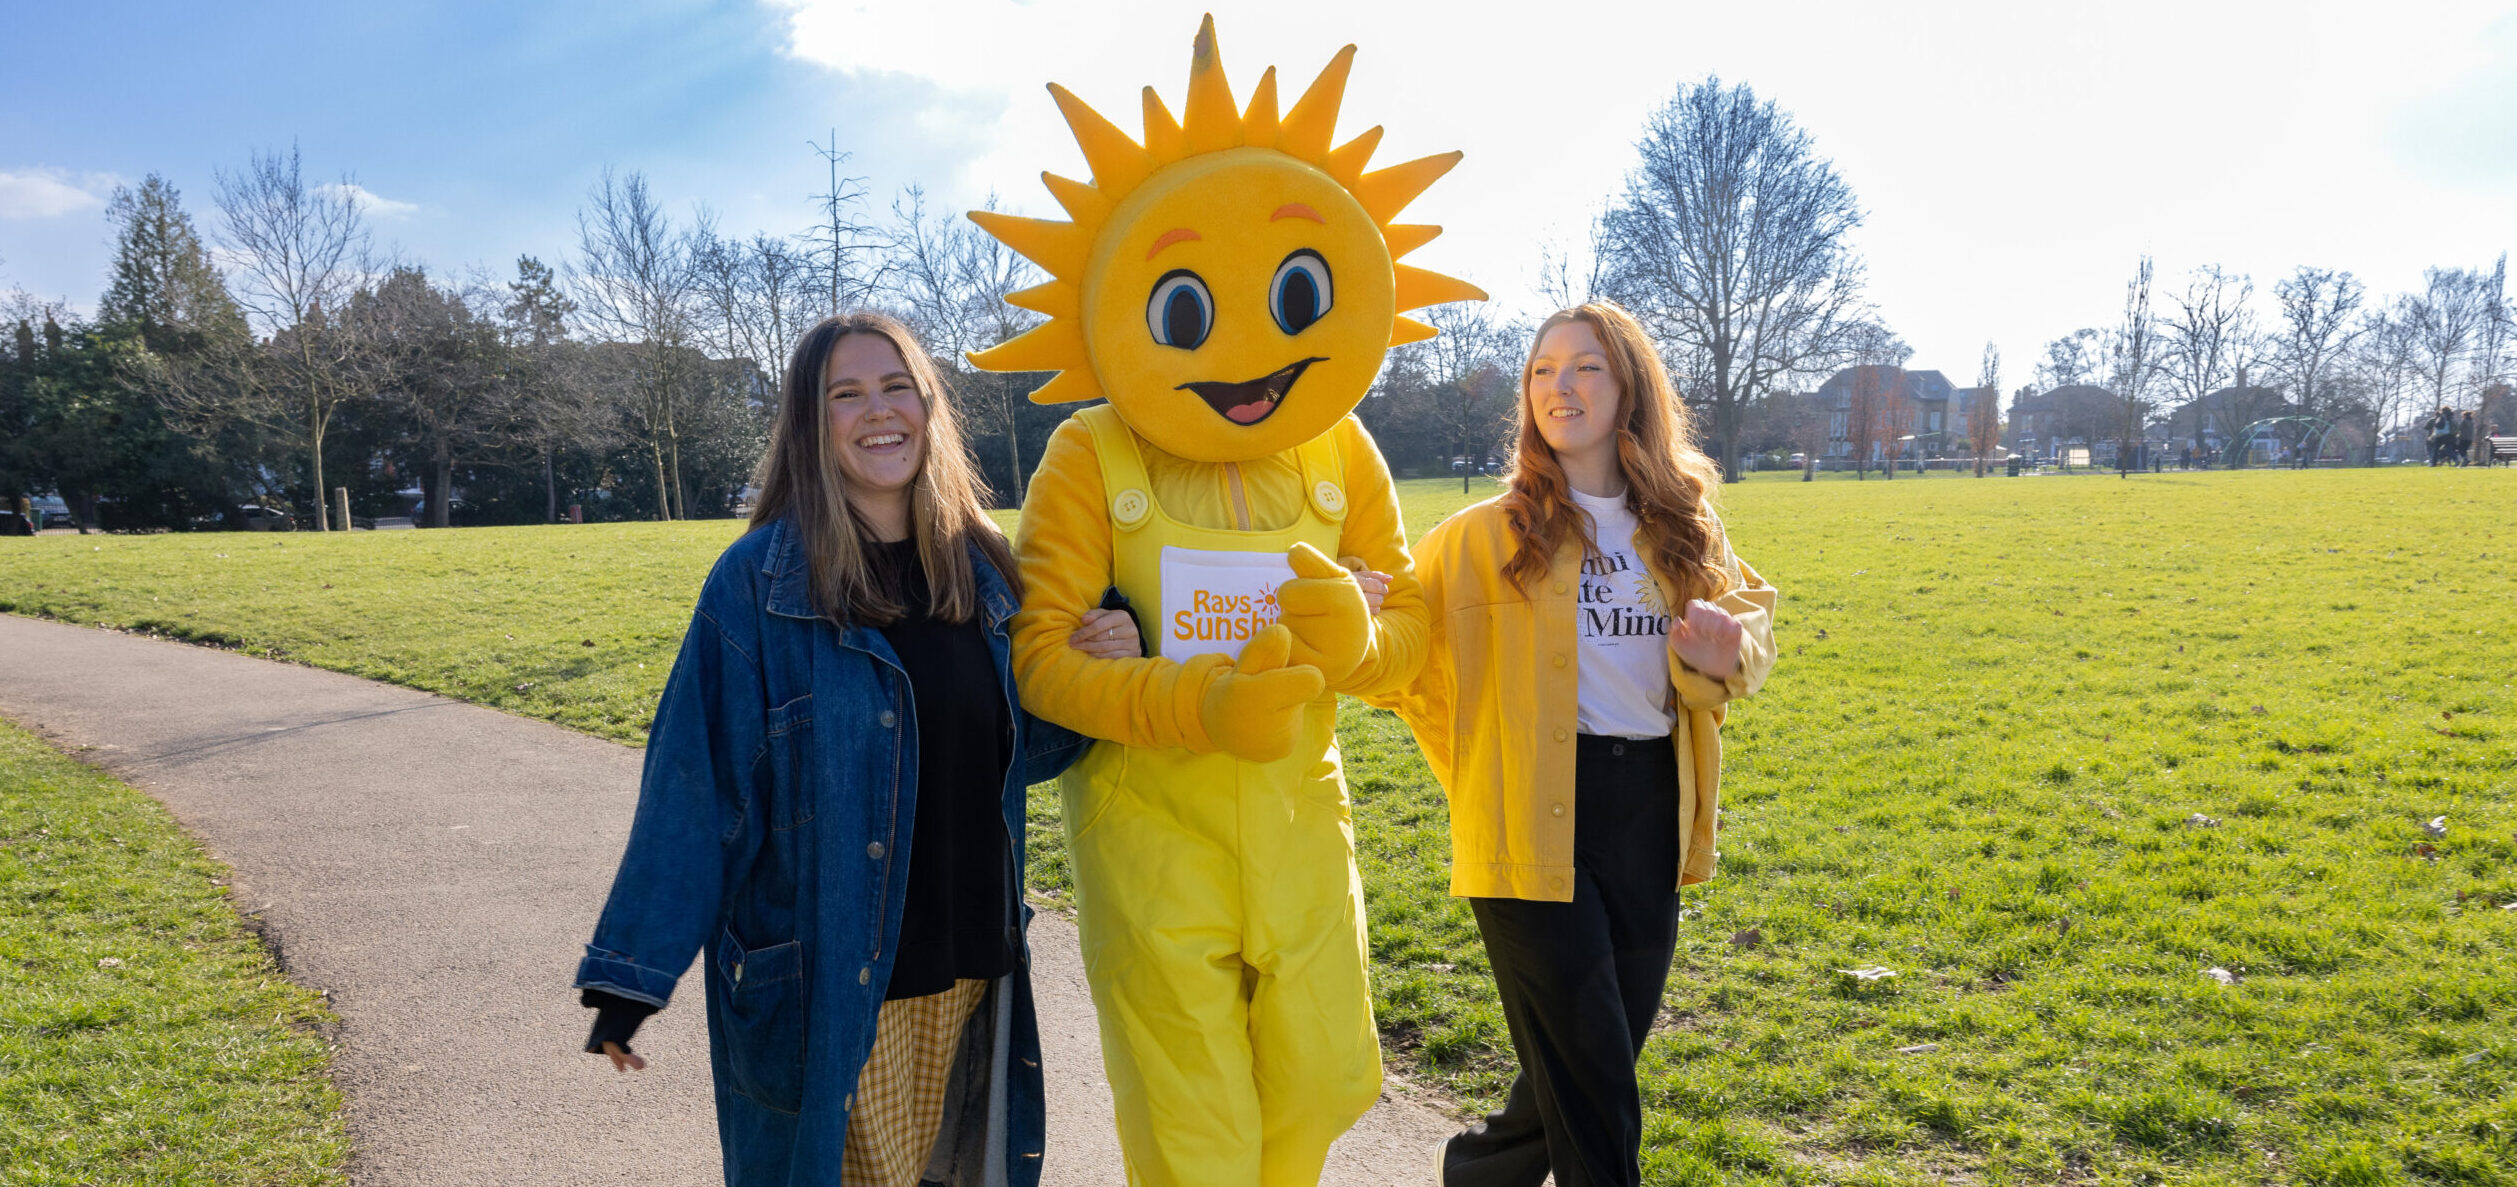 Rays of Sunshine's mascot Sunny walking with two of our wish granters